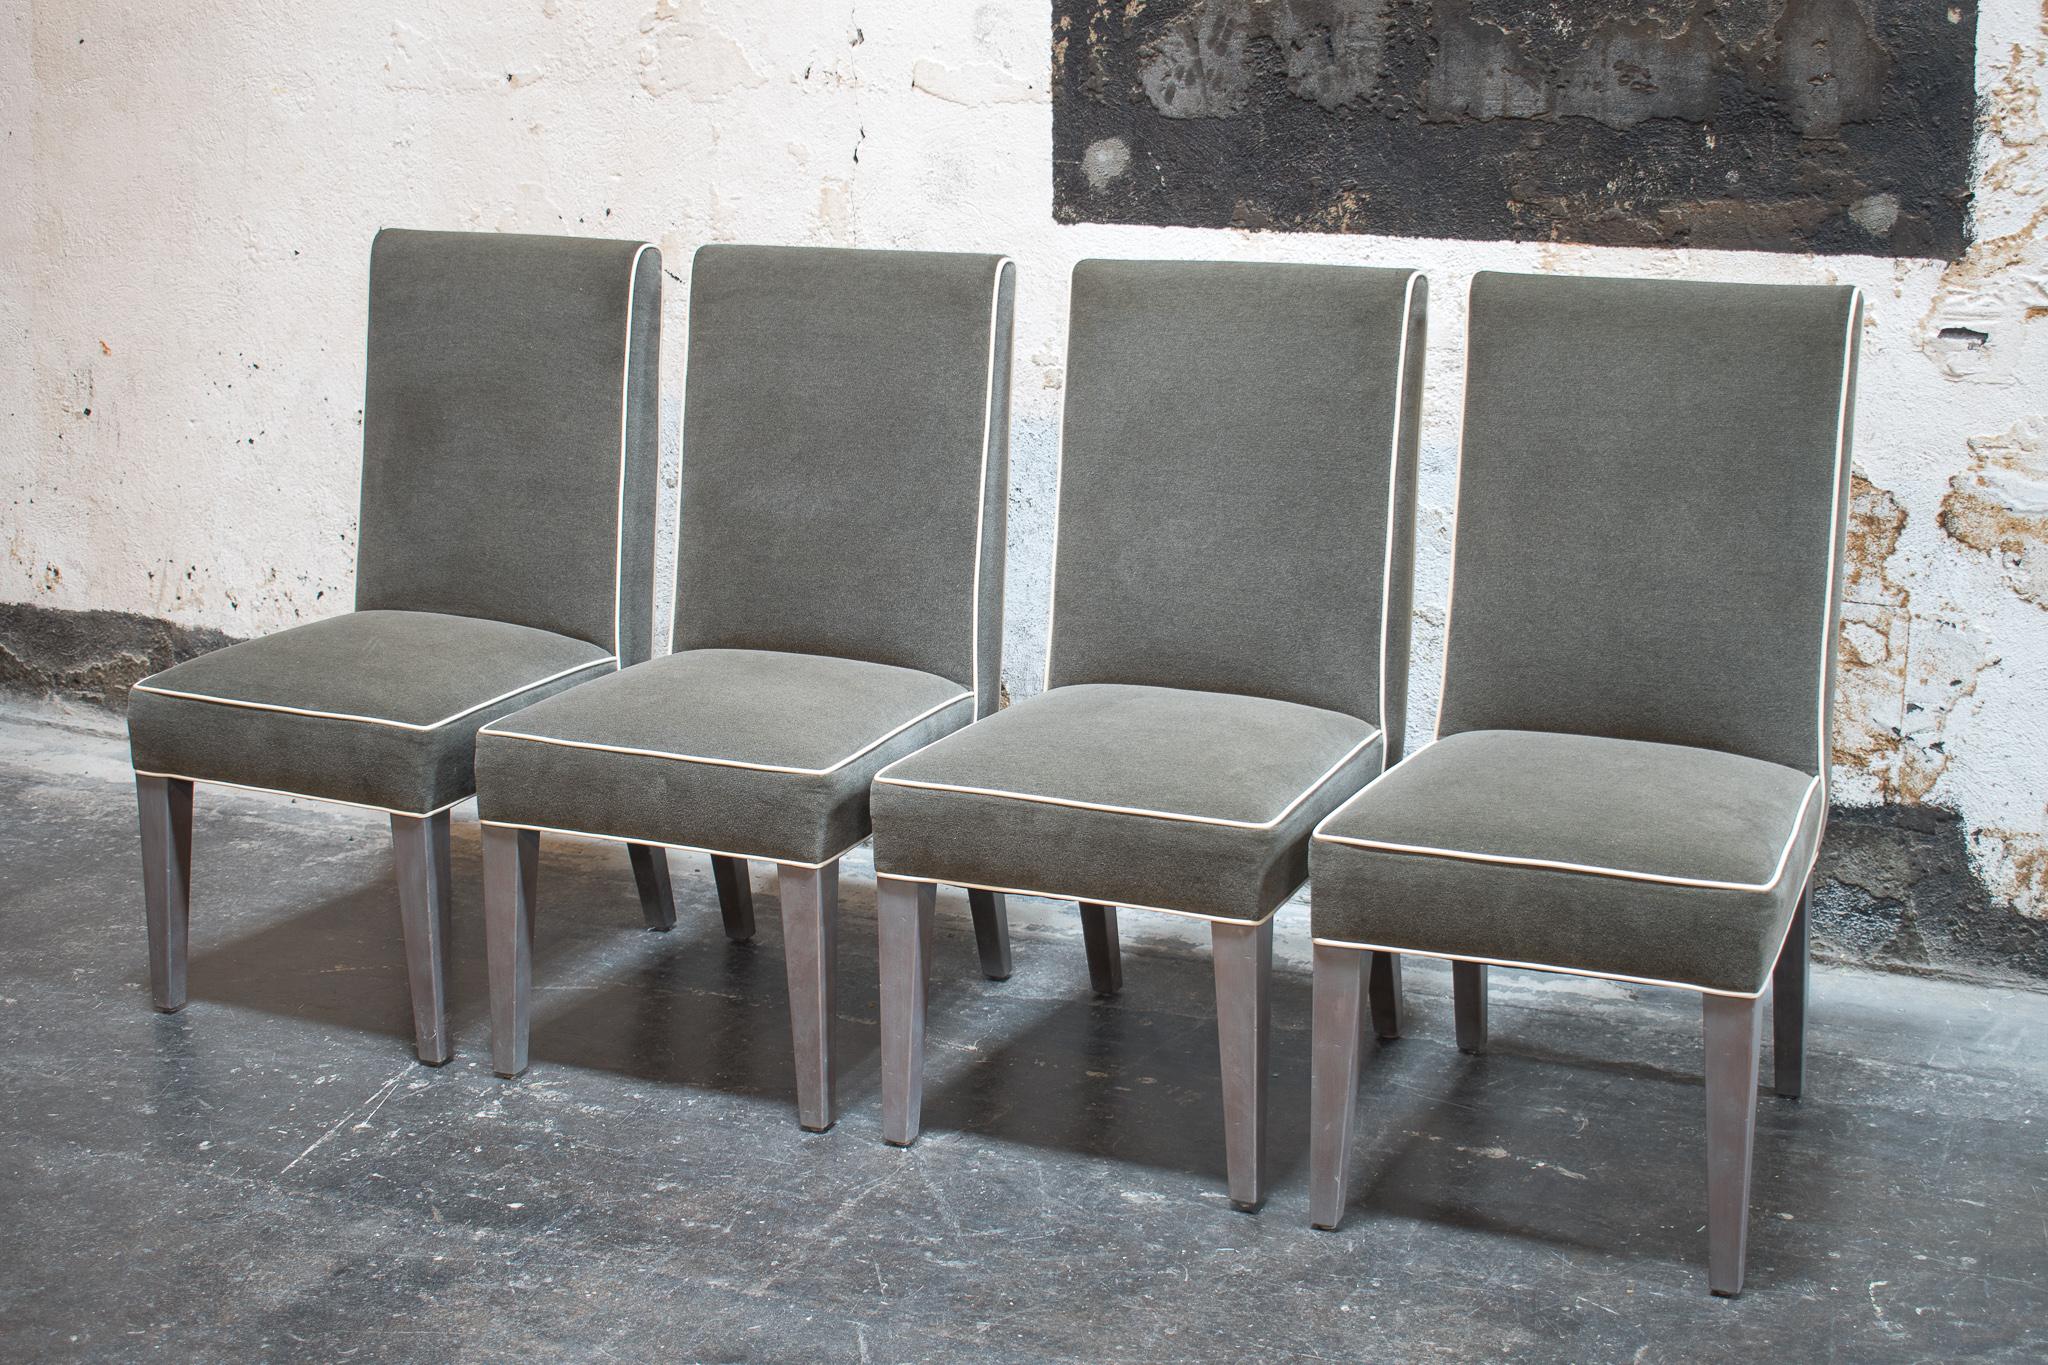 Fabulous set of 4 custom Nils dining chairs in grey mélange fabric with off white ultra leather contrast welt and Swedish grey finish legs. Ready for immediate delivery!.